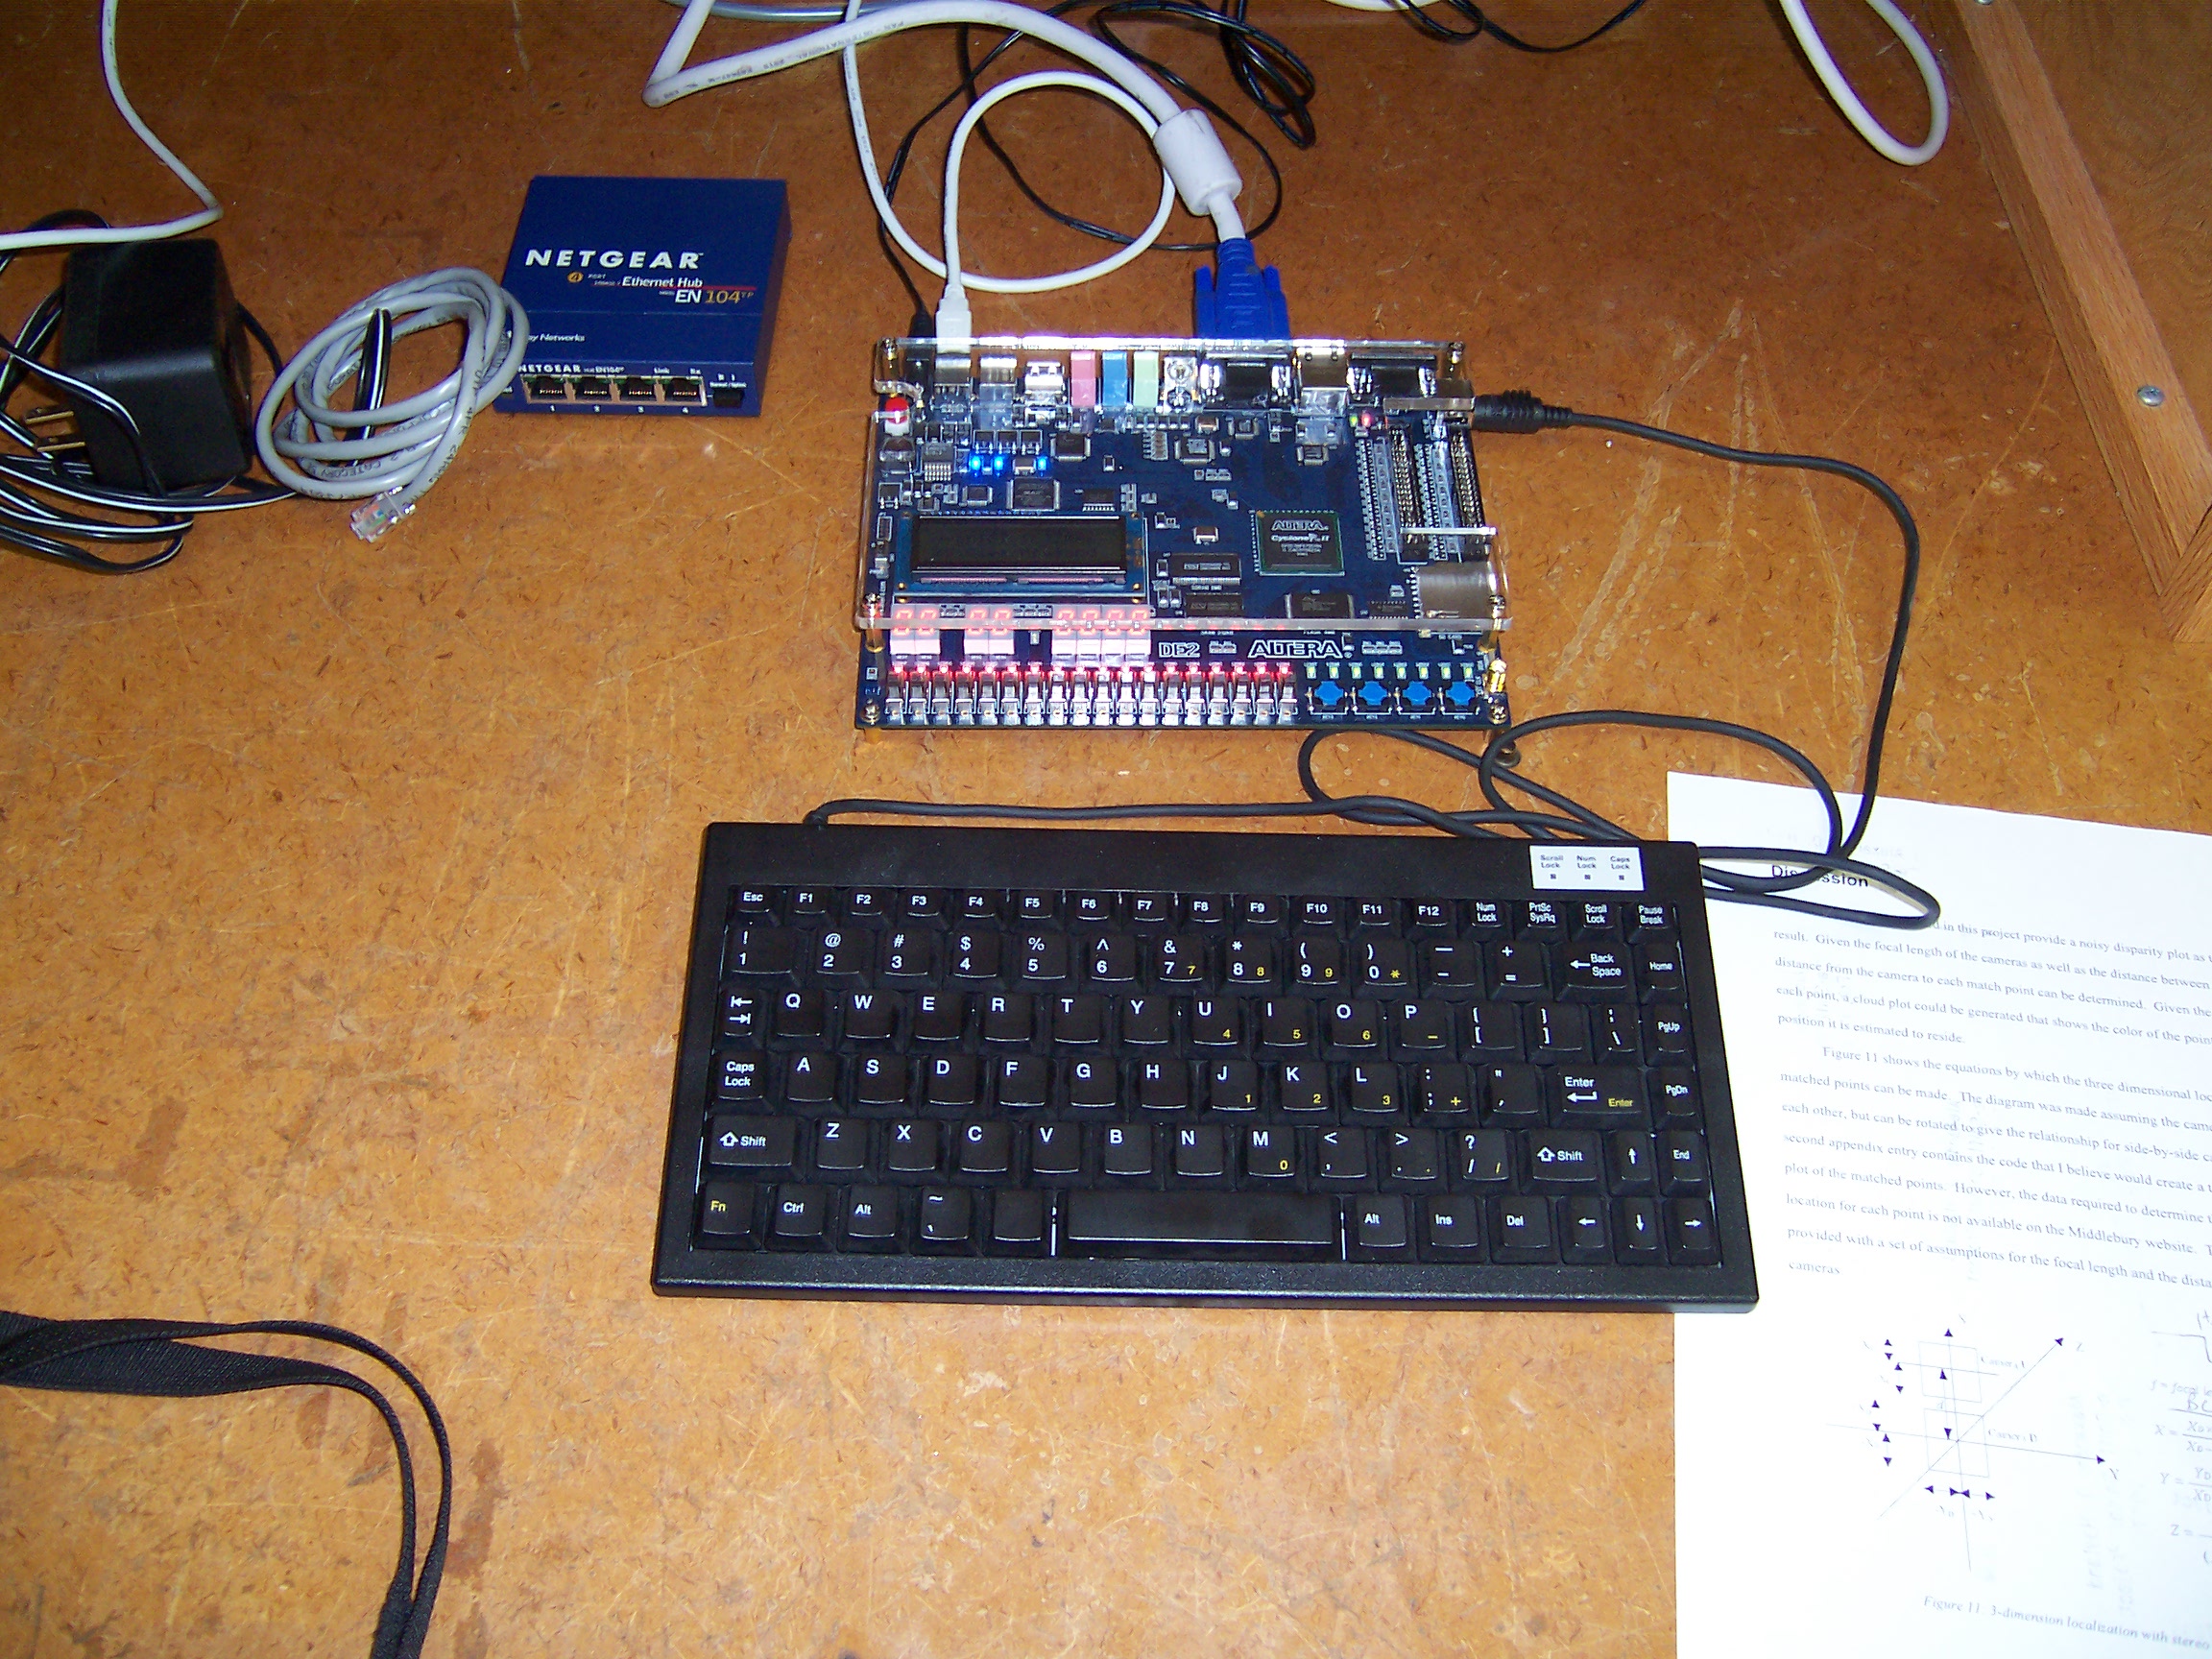 The DE2 with attached keyboard